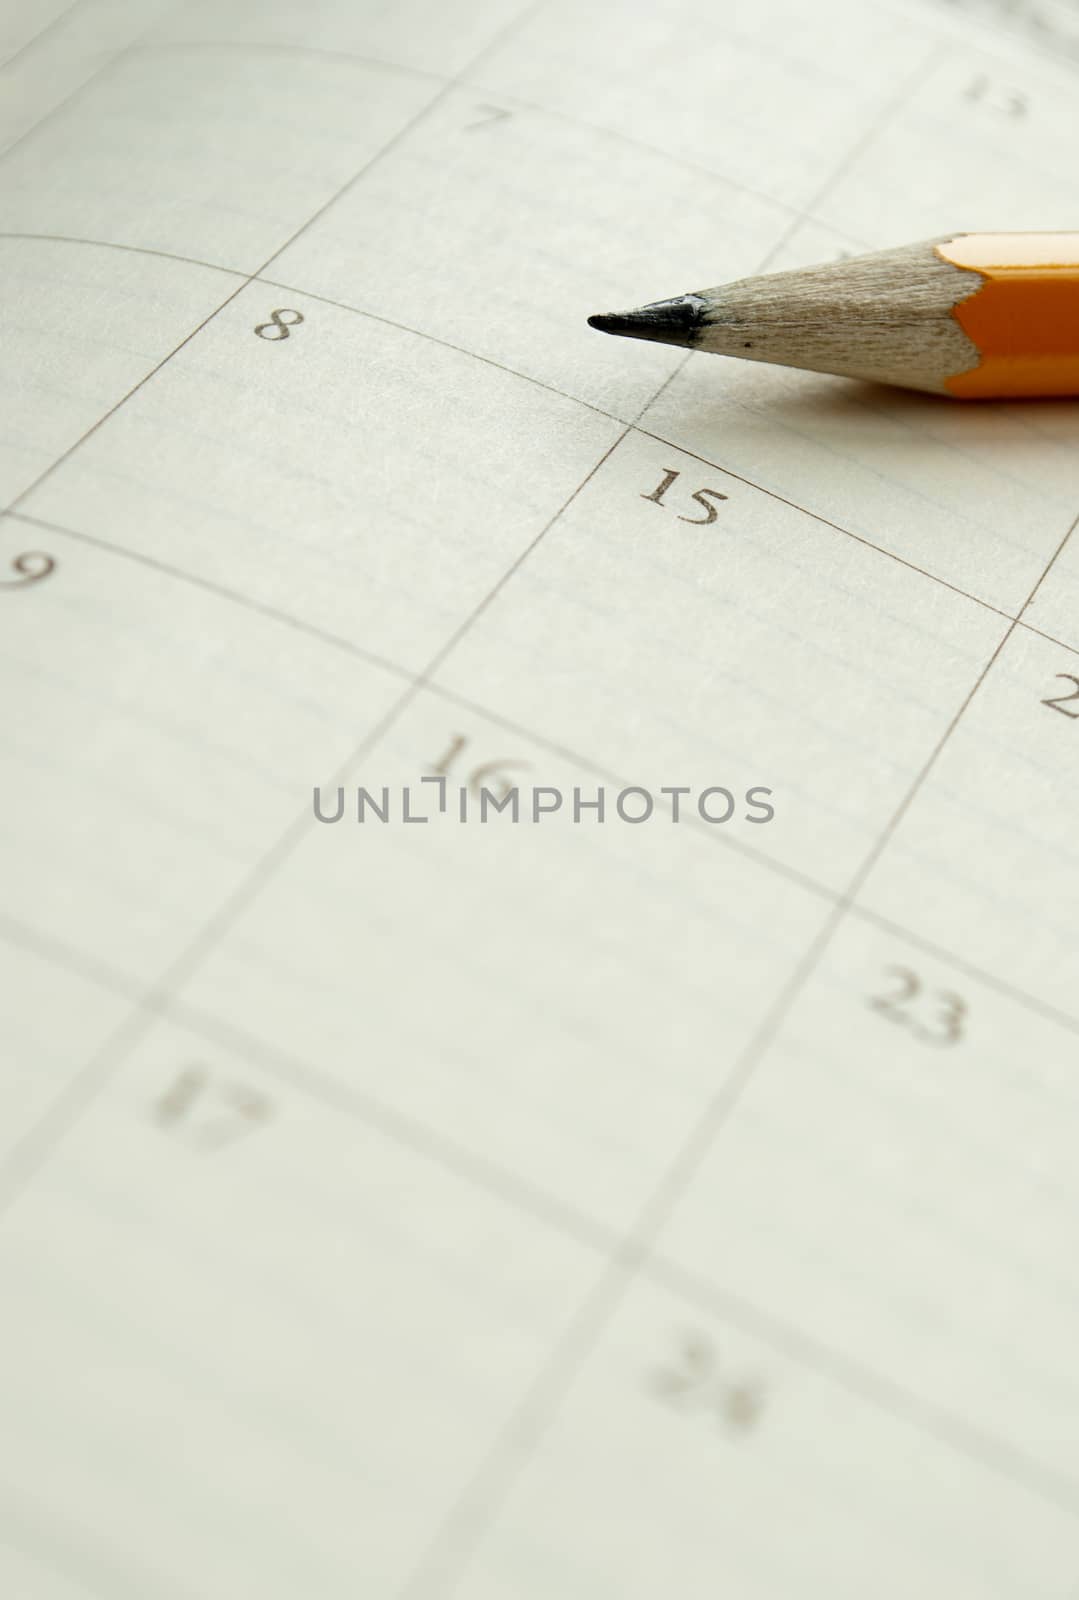 home calendar with dates and yellow sharpened pencil